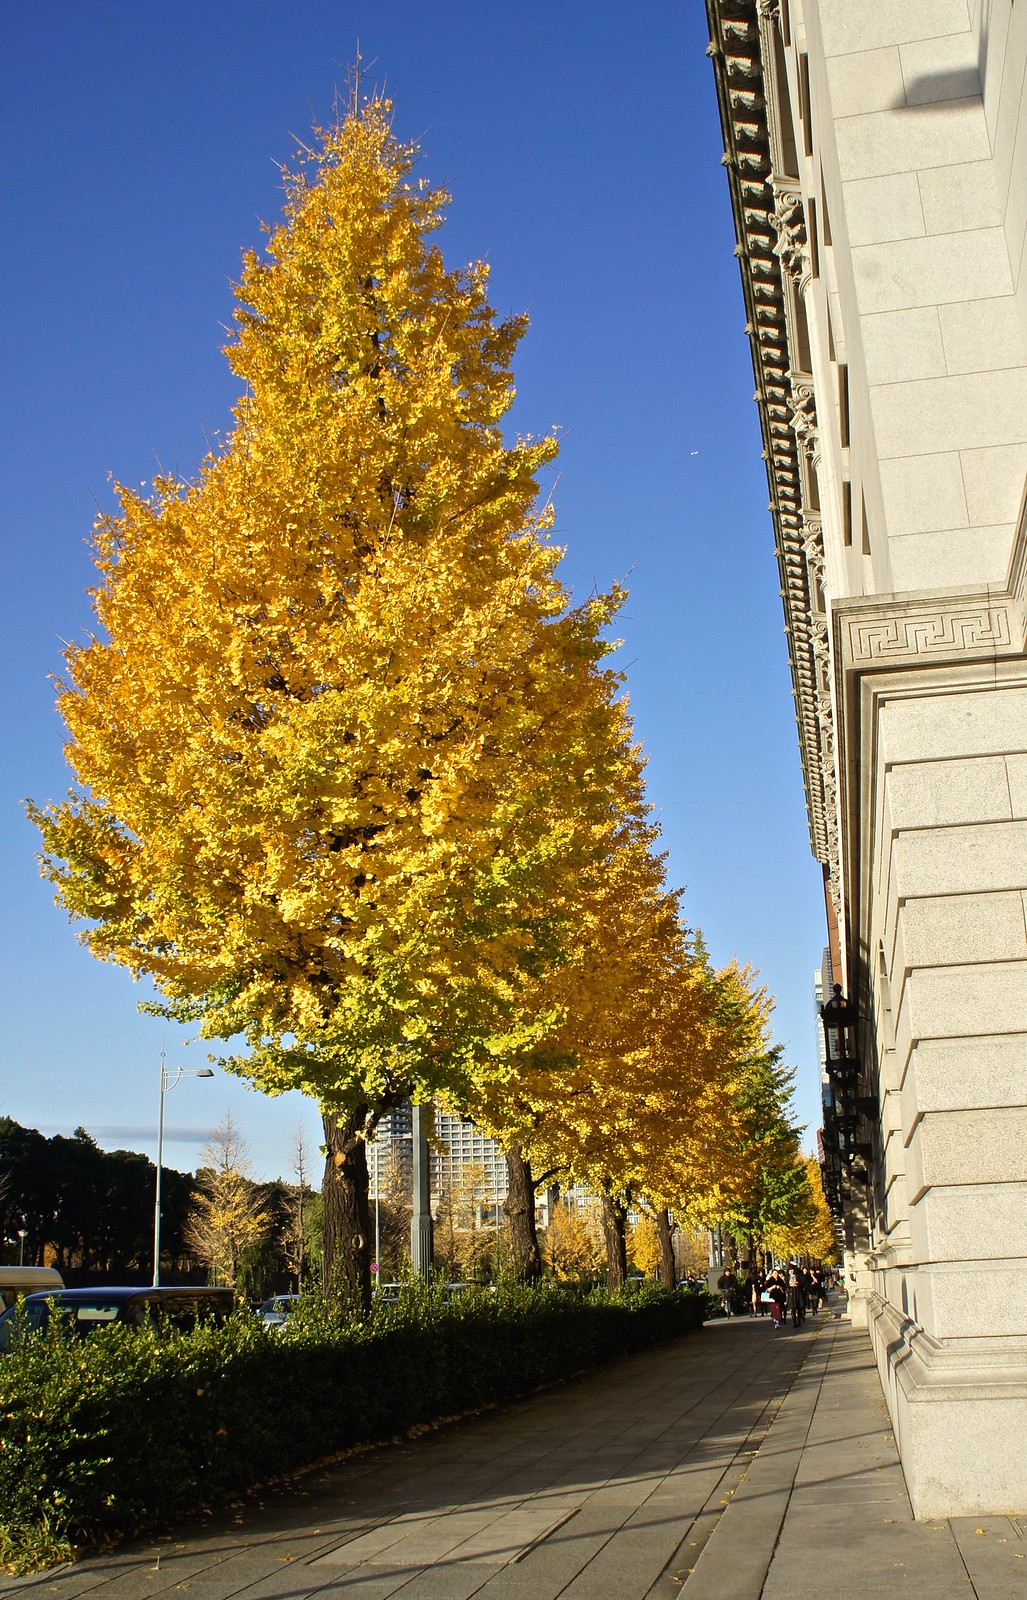 Tokyo Station in background with Ginkgo, Maidenhair color change 